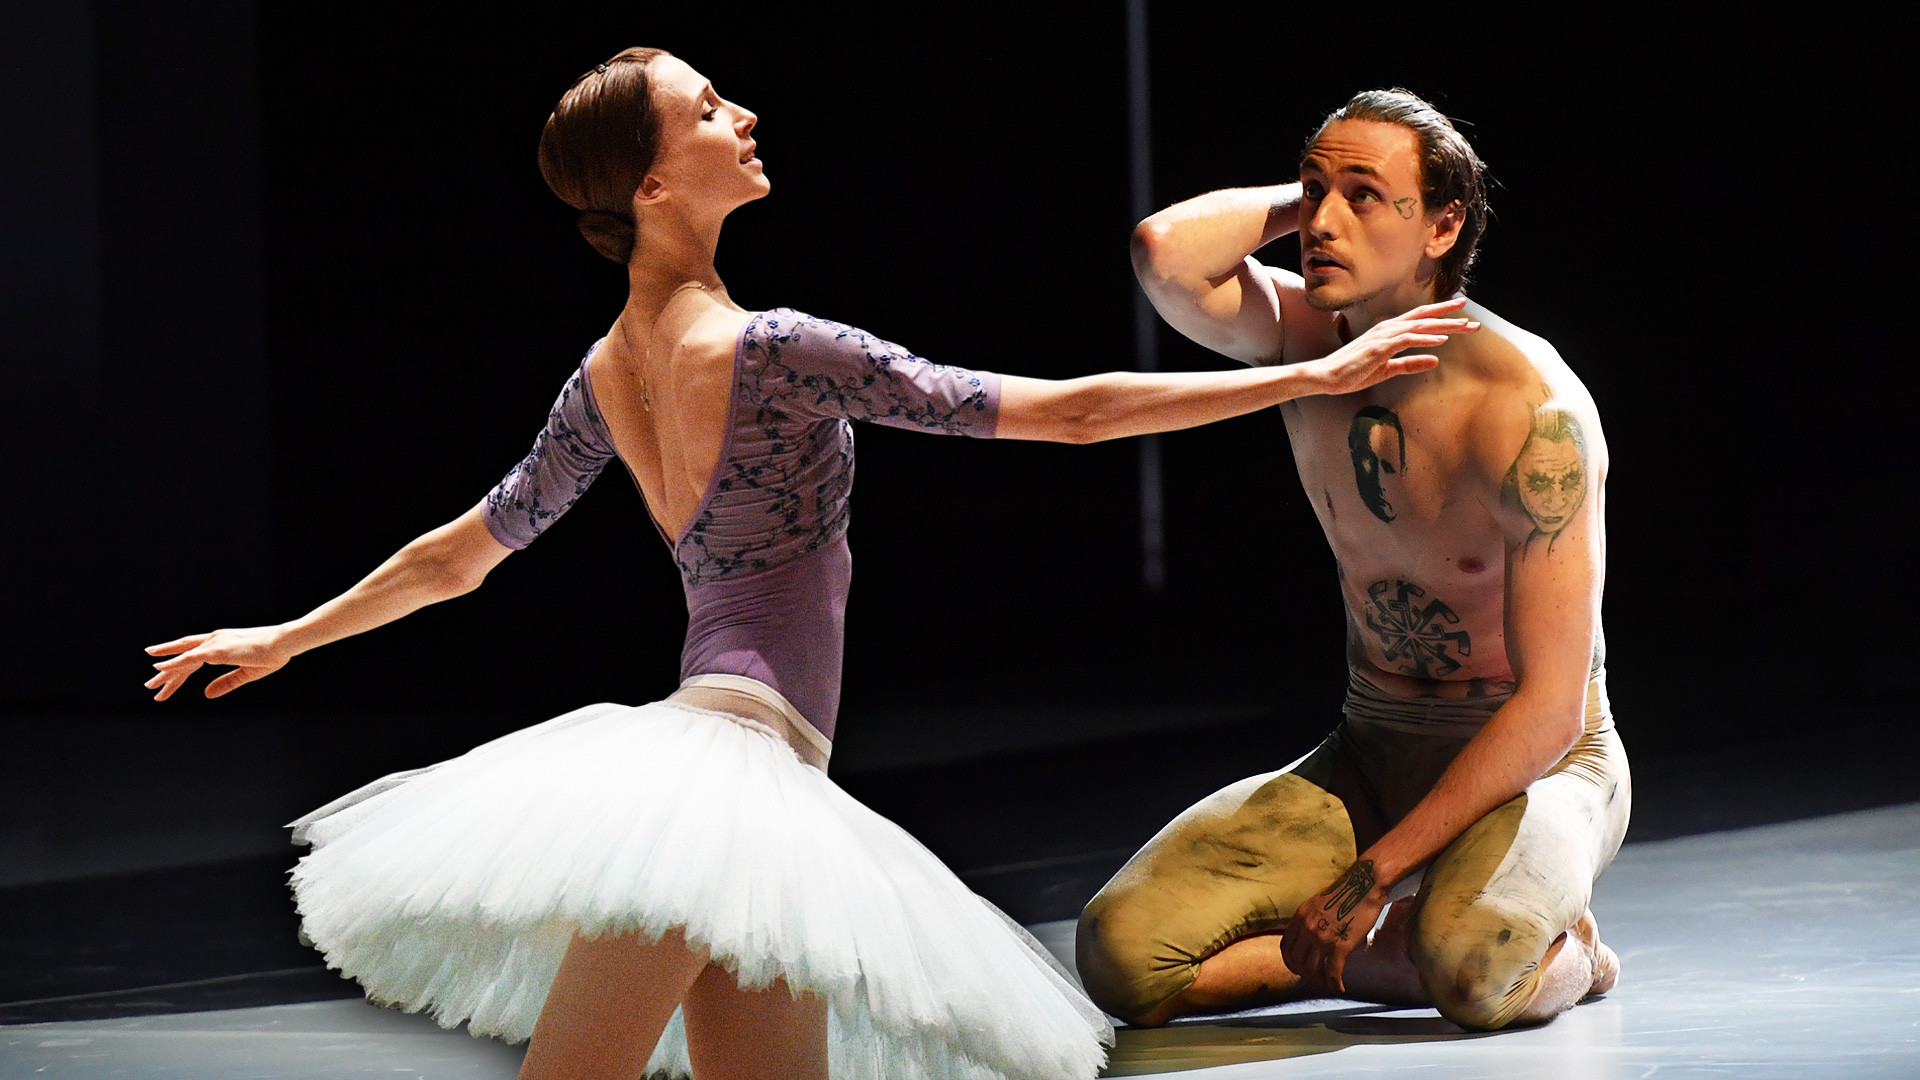 fe Shredded Det 15 stars of Russian ballet to follow on Instagram (PHOTOS) - Russia Beyond